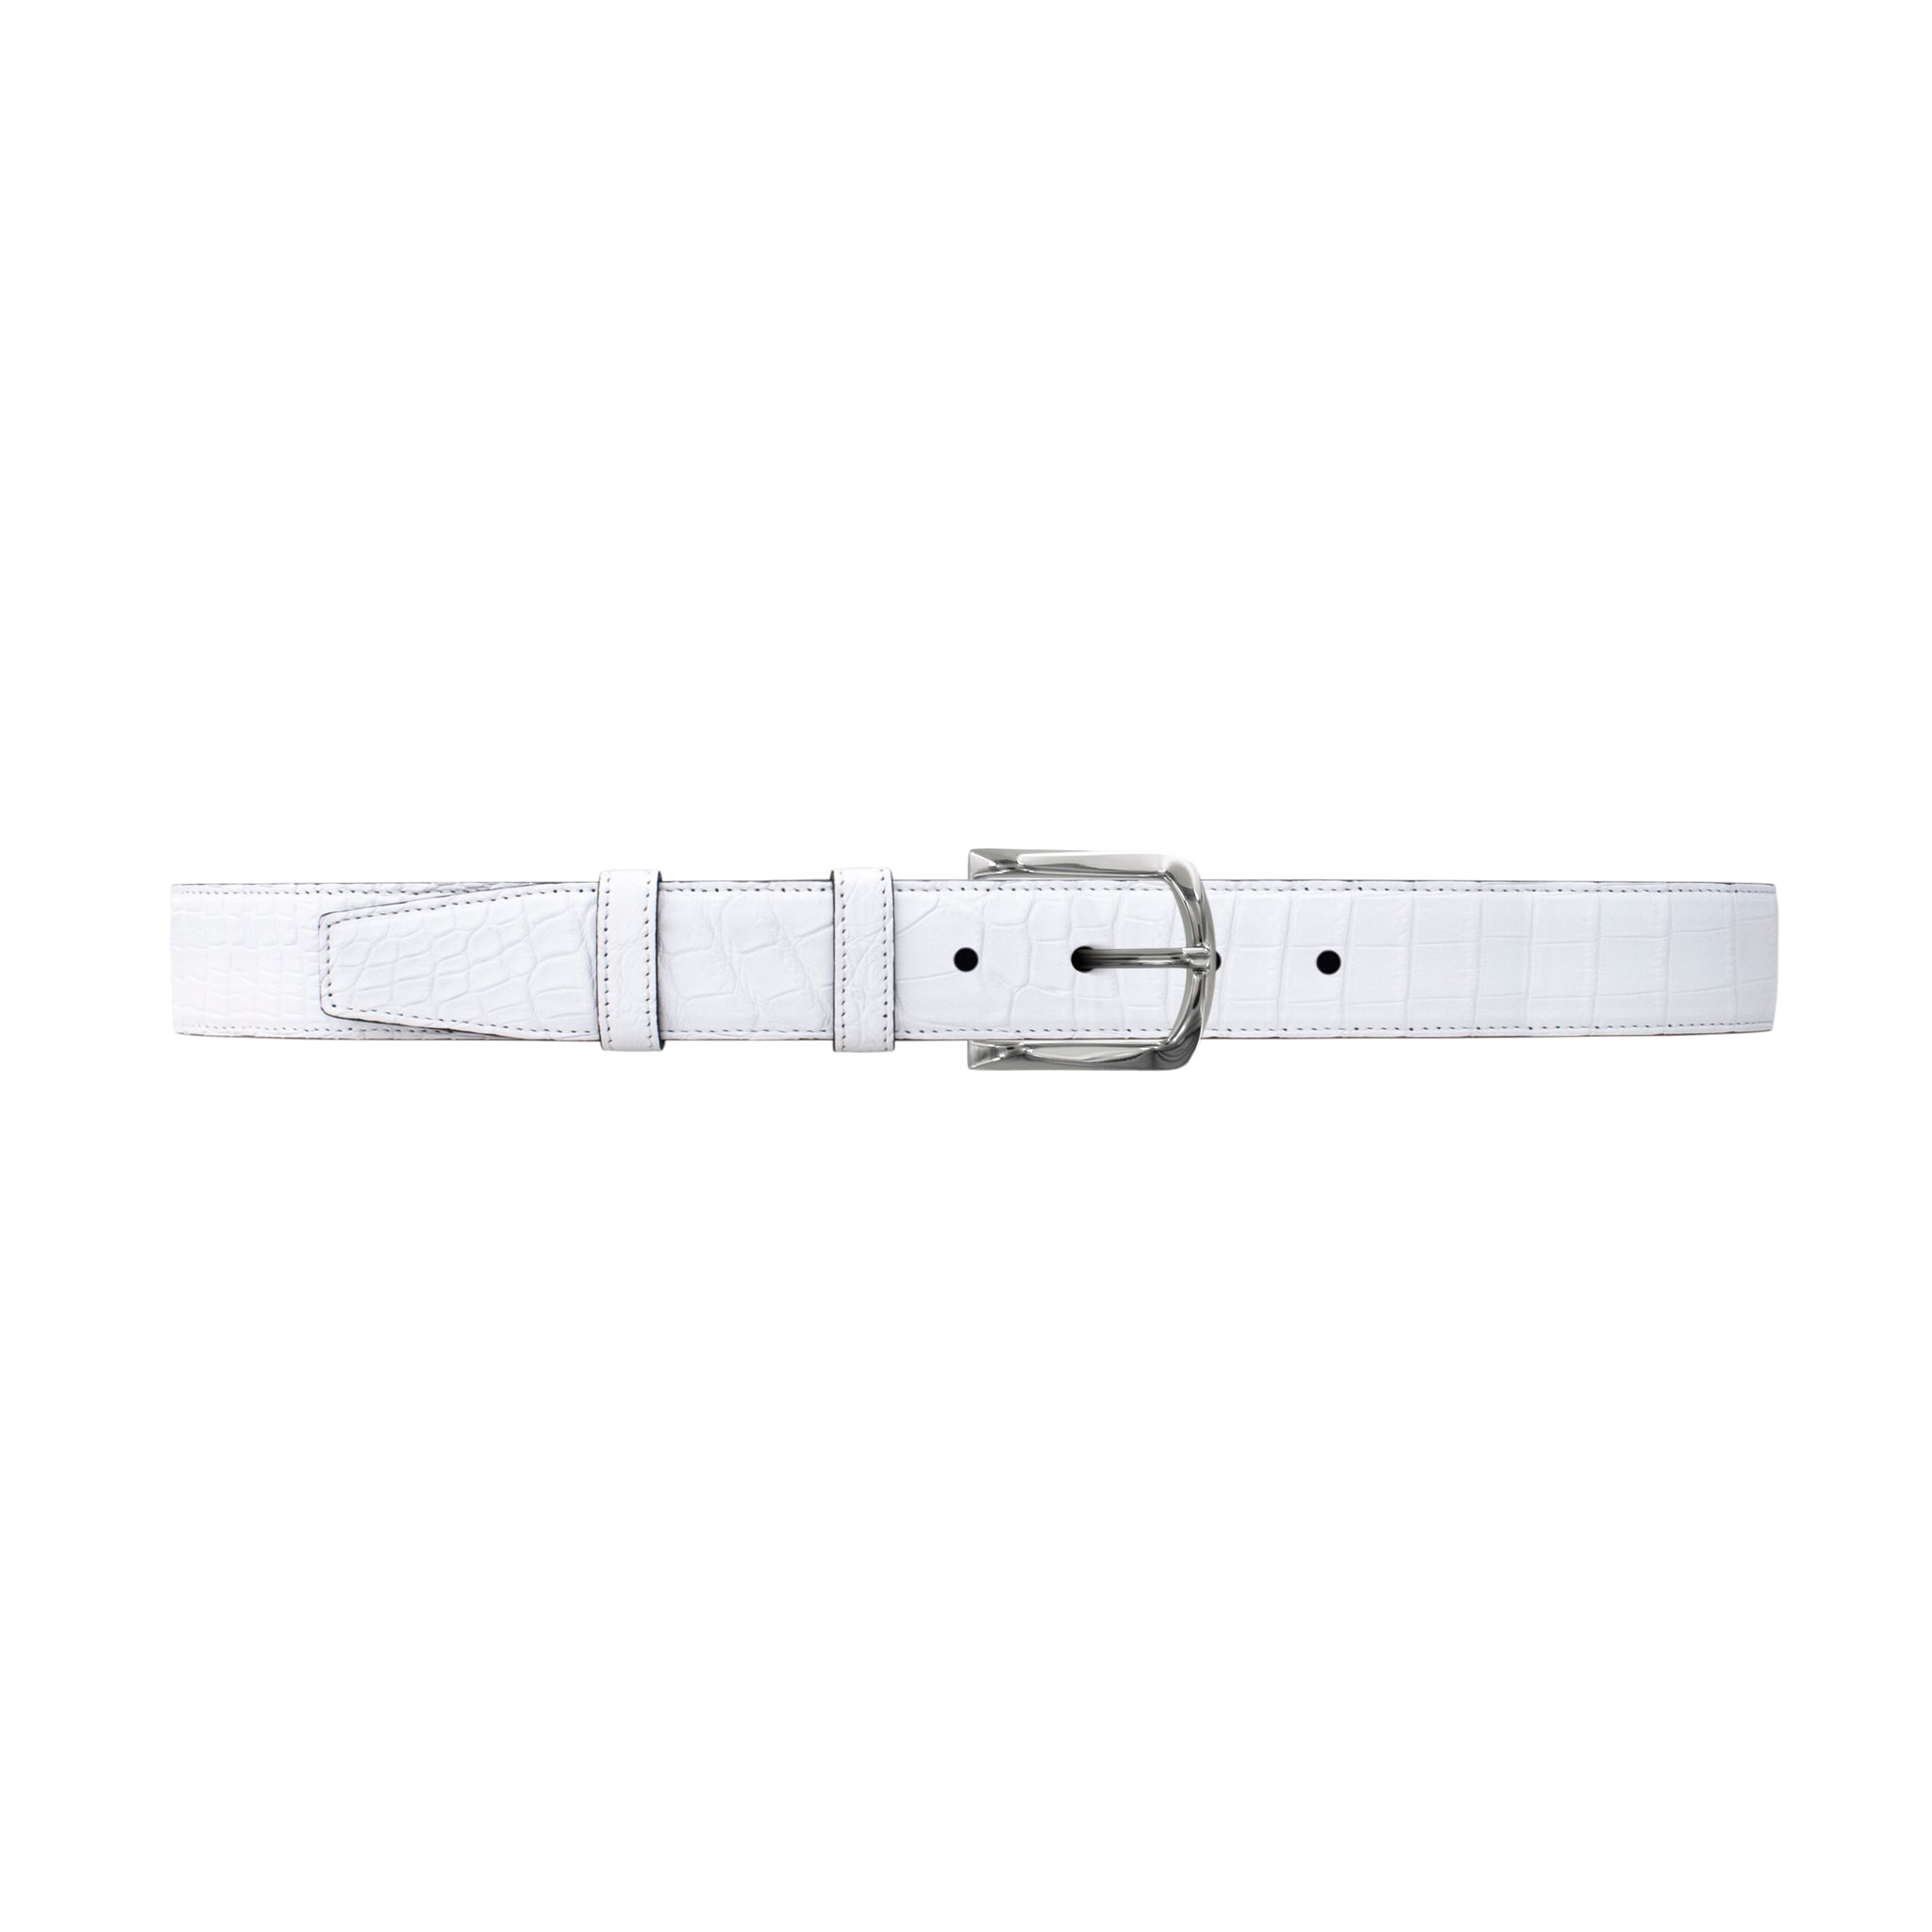 1 1/4" White Classic Belt with Sutton Dress Buckle in Polished Nickel